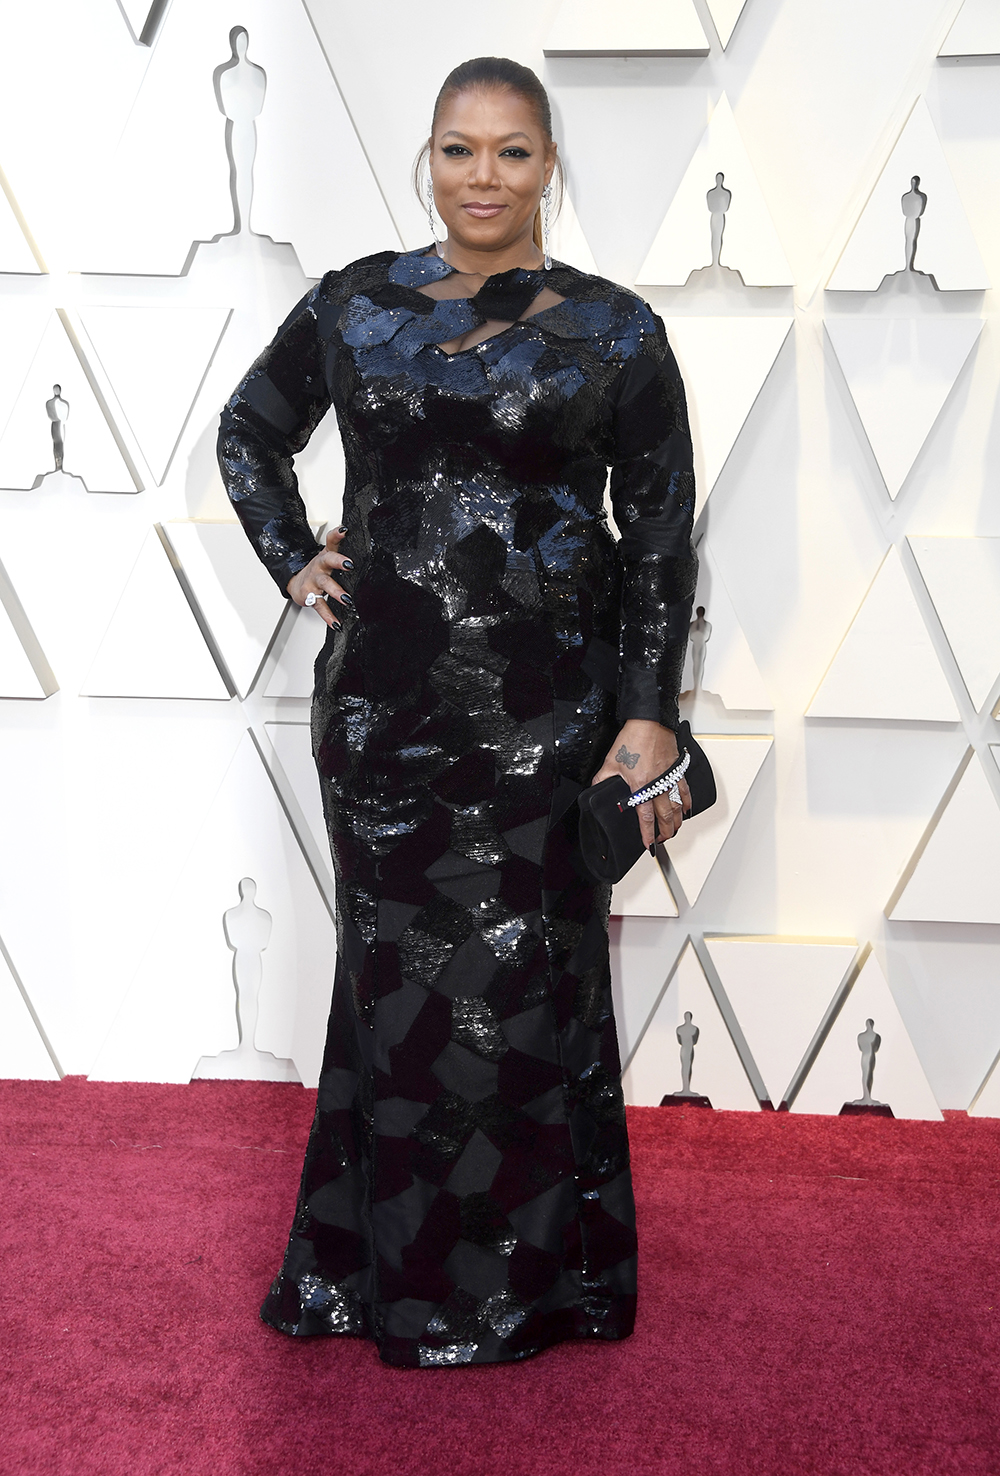 HOLLYWOOD, CALIFORNIA - FEBRUARY 24: Queen Latifah attends the 91st Annual Academy Awards at Hollywood and Highland on February 24, 2019 in Hollywood, California. (Photo by Frazer Harrison/Getty Images)